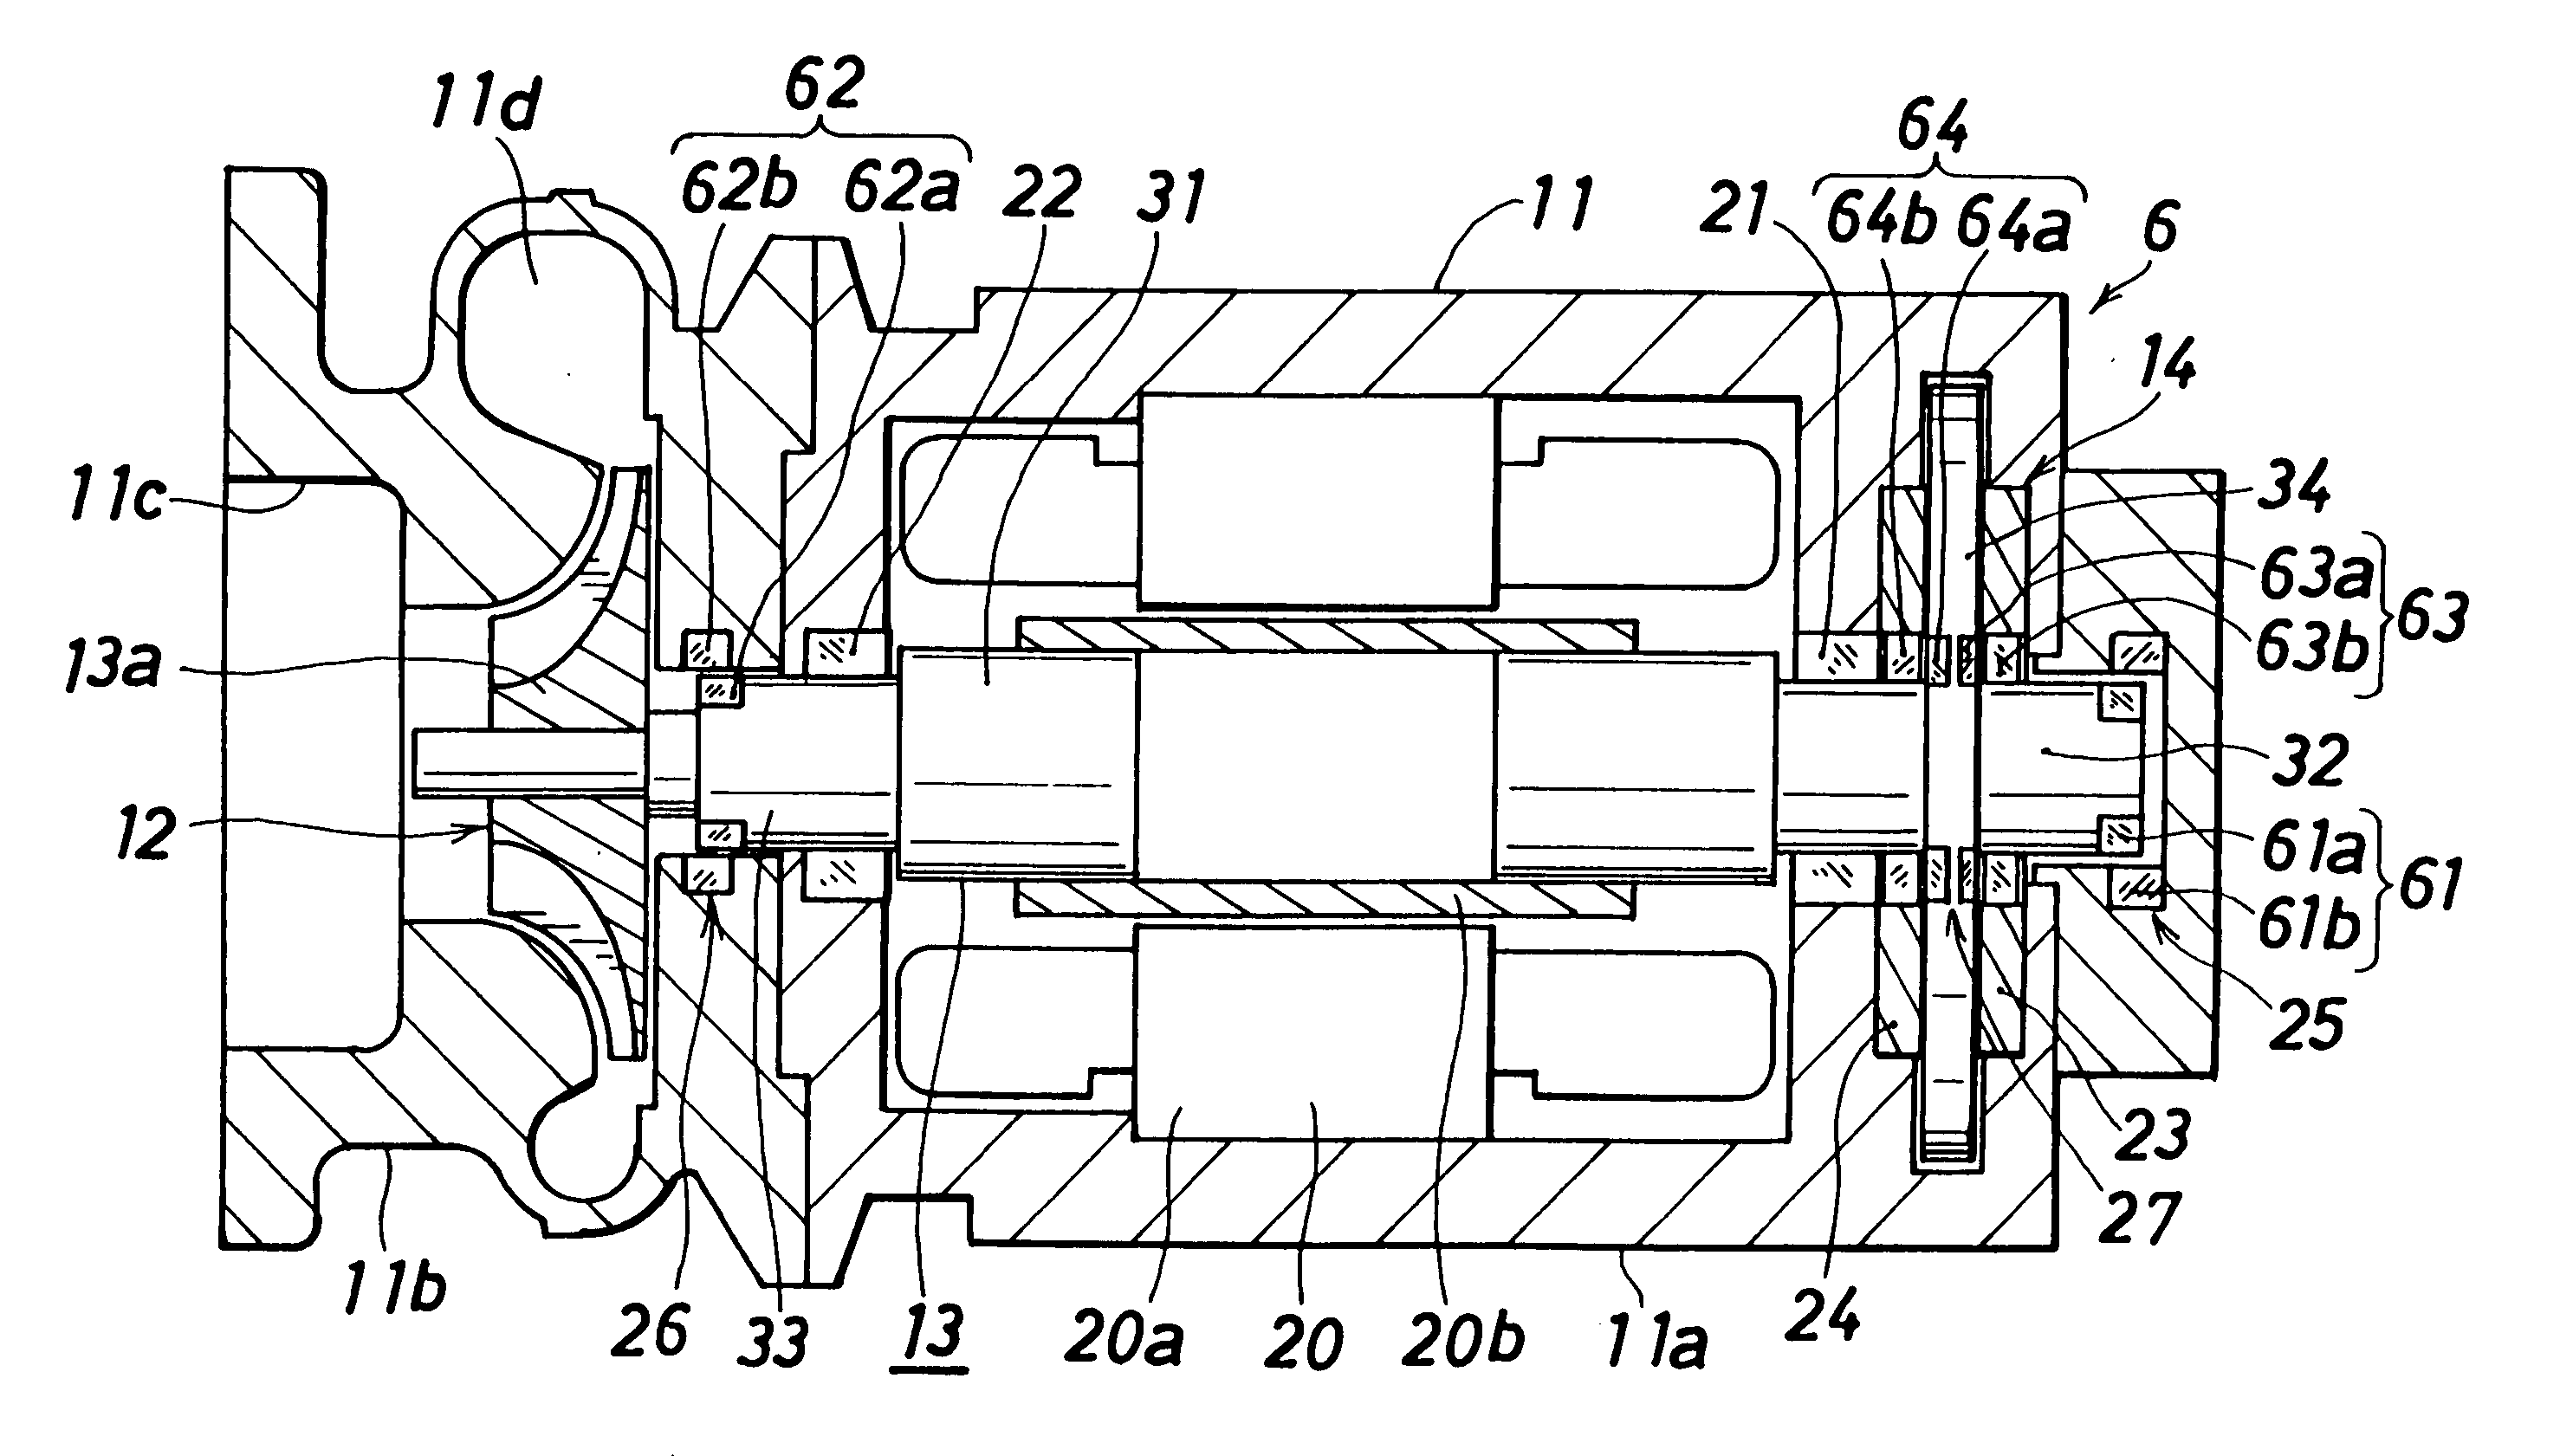 Fuel-cell compressed-air supplying device